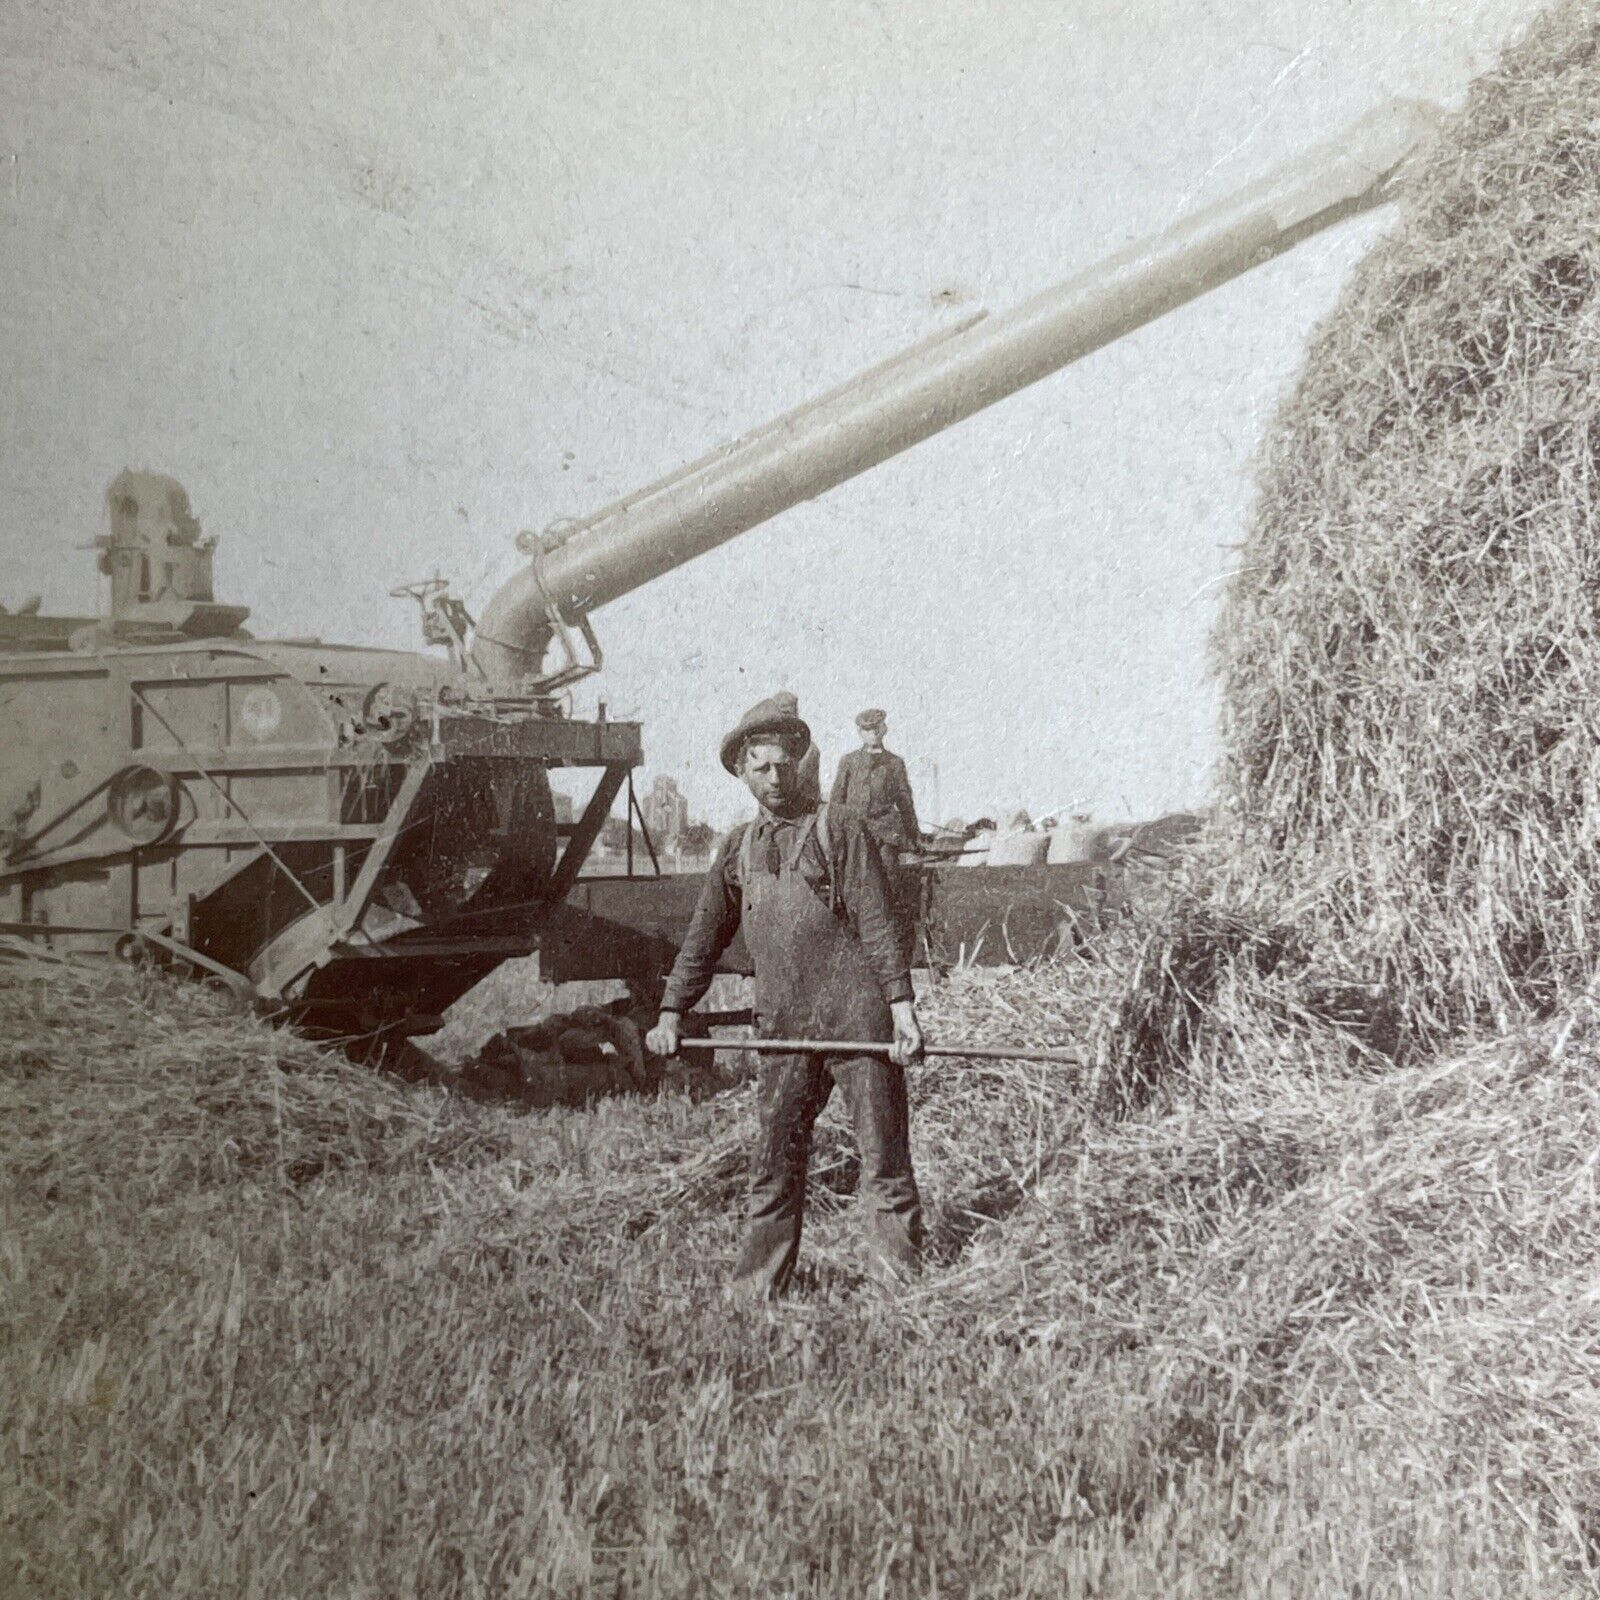 Antique 1900 Harvesting Wheat In Manitoba Canada Stereoview Photo Card PC873